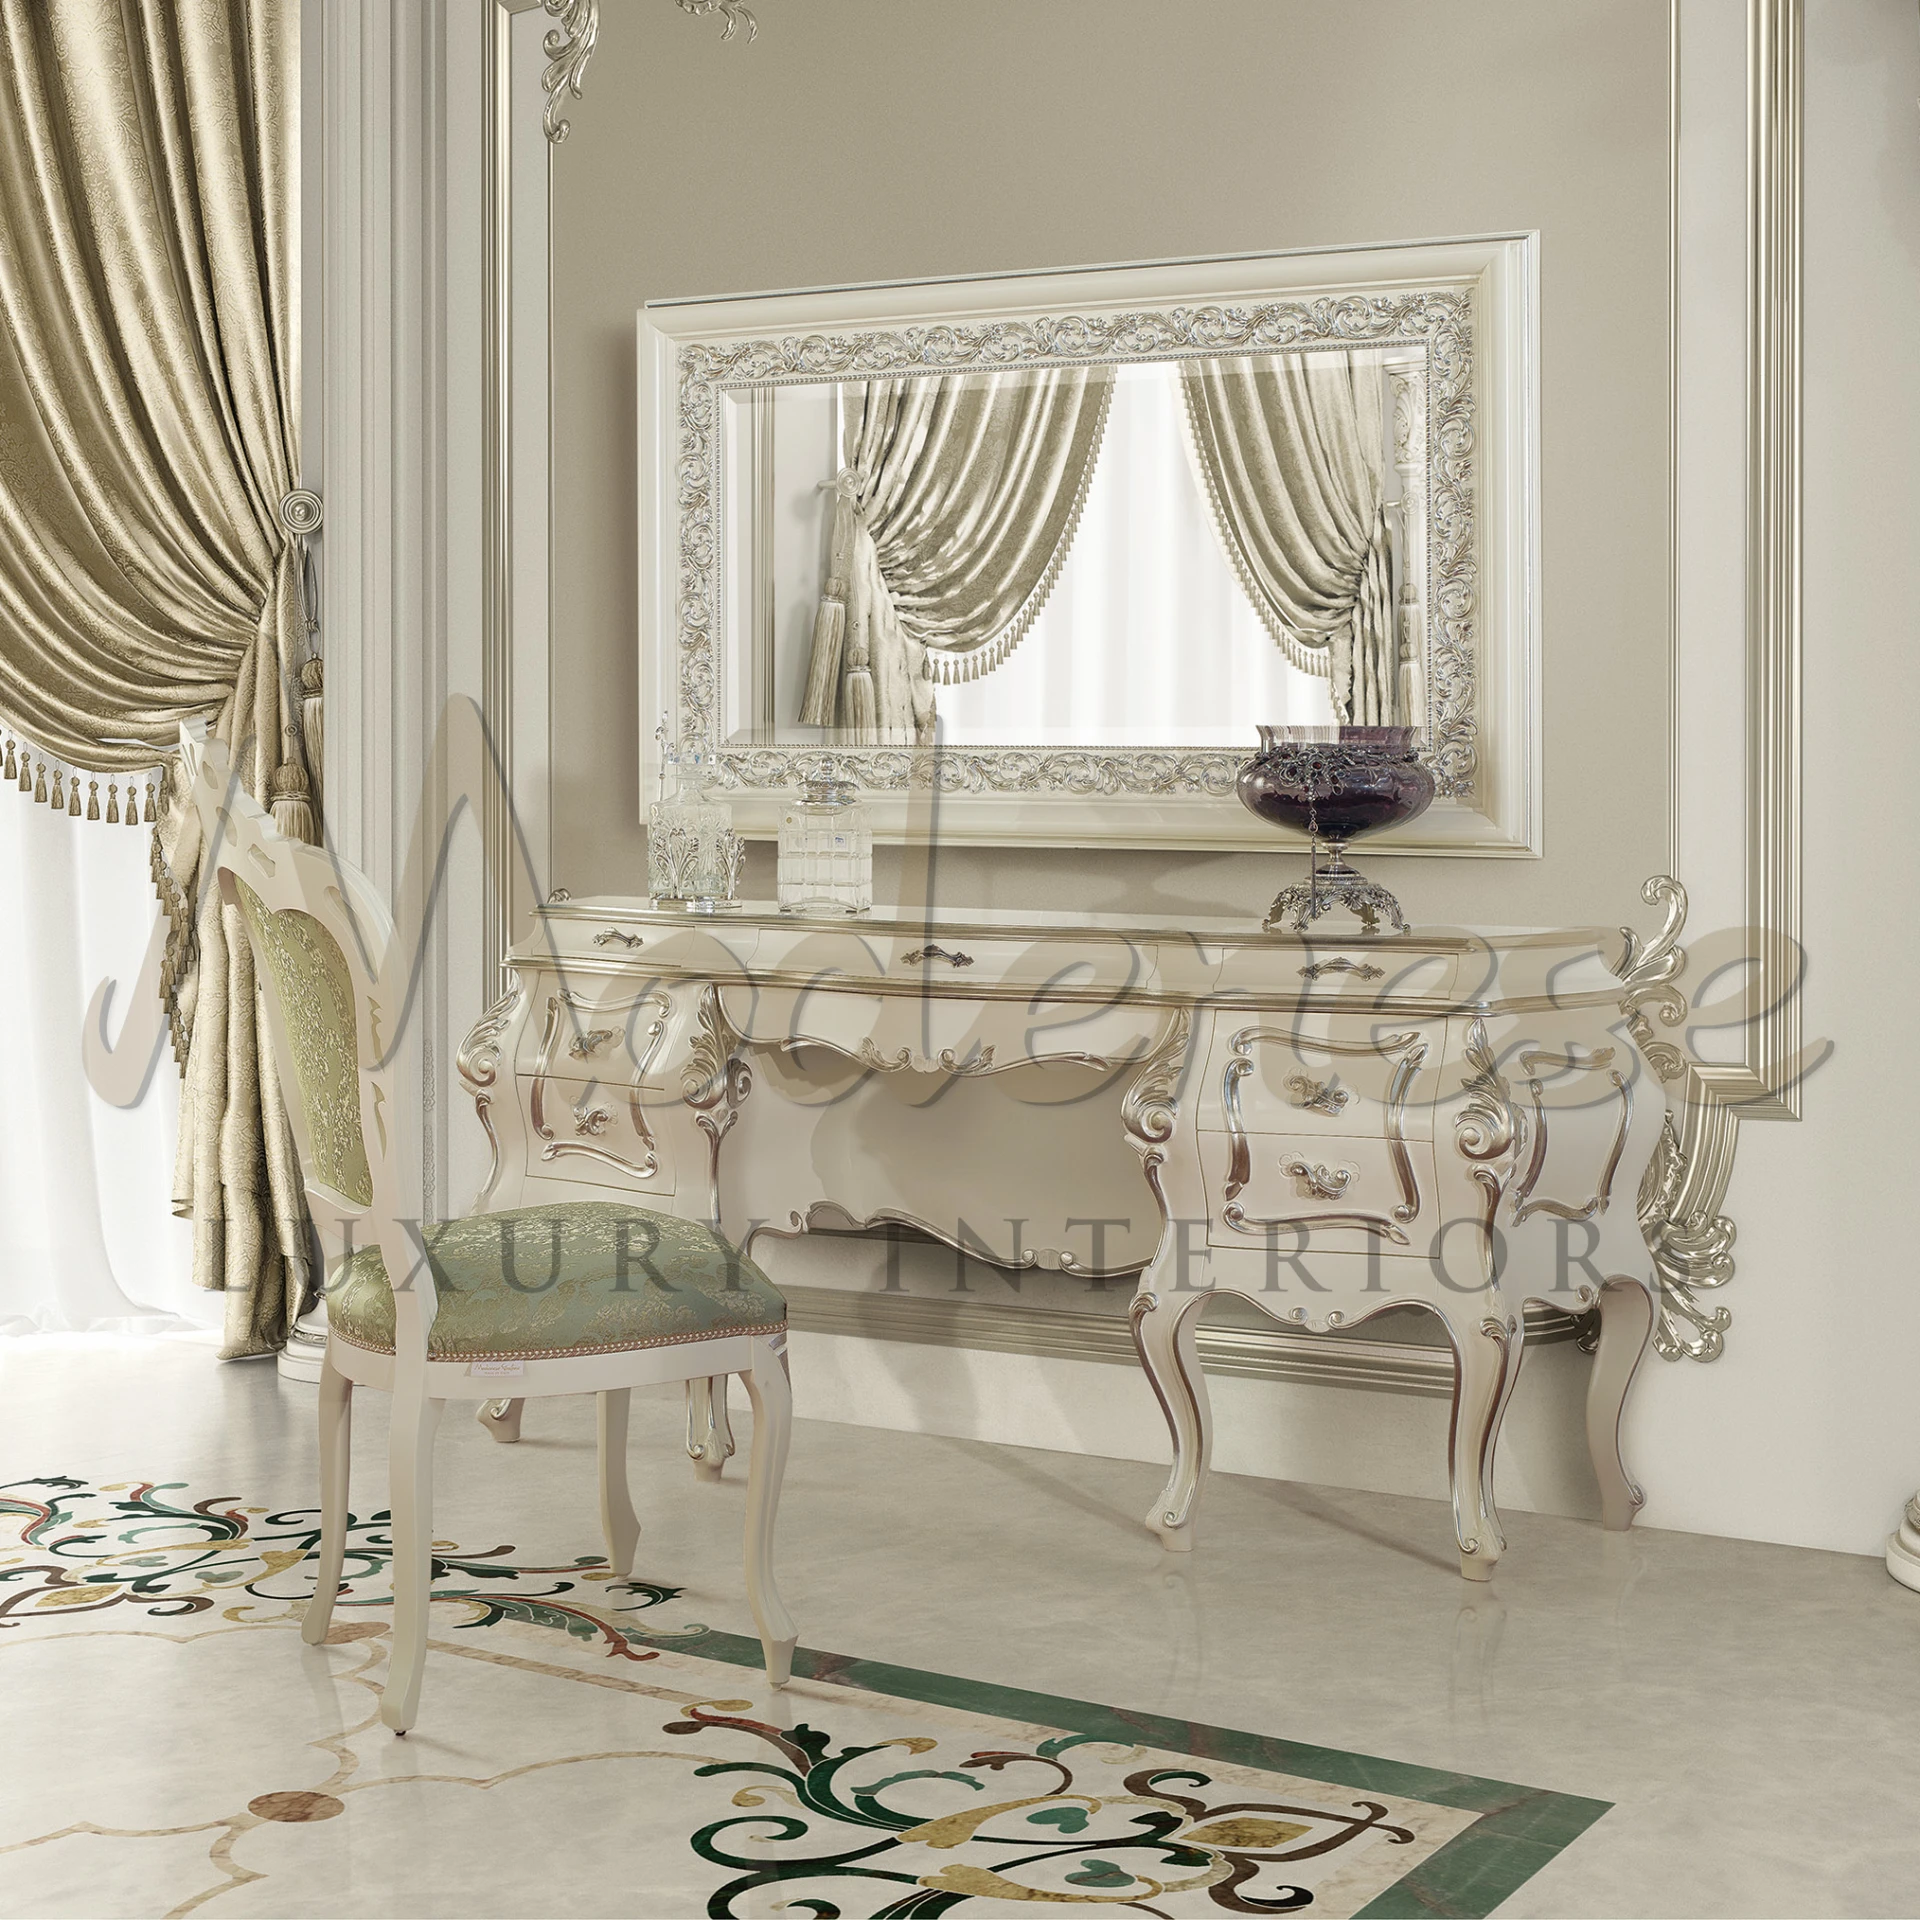 Classically designed makeup vanity set with a cream finish, featuring detailed carvings, a large framed mirror with draped curtains.